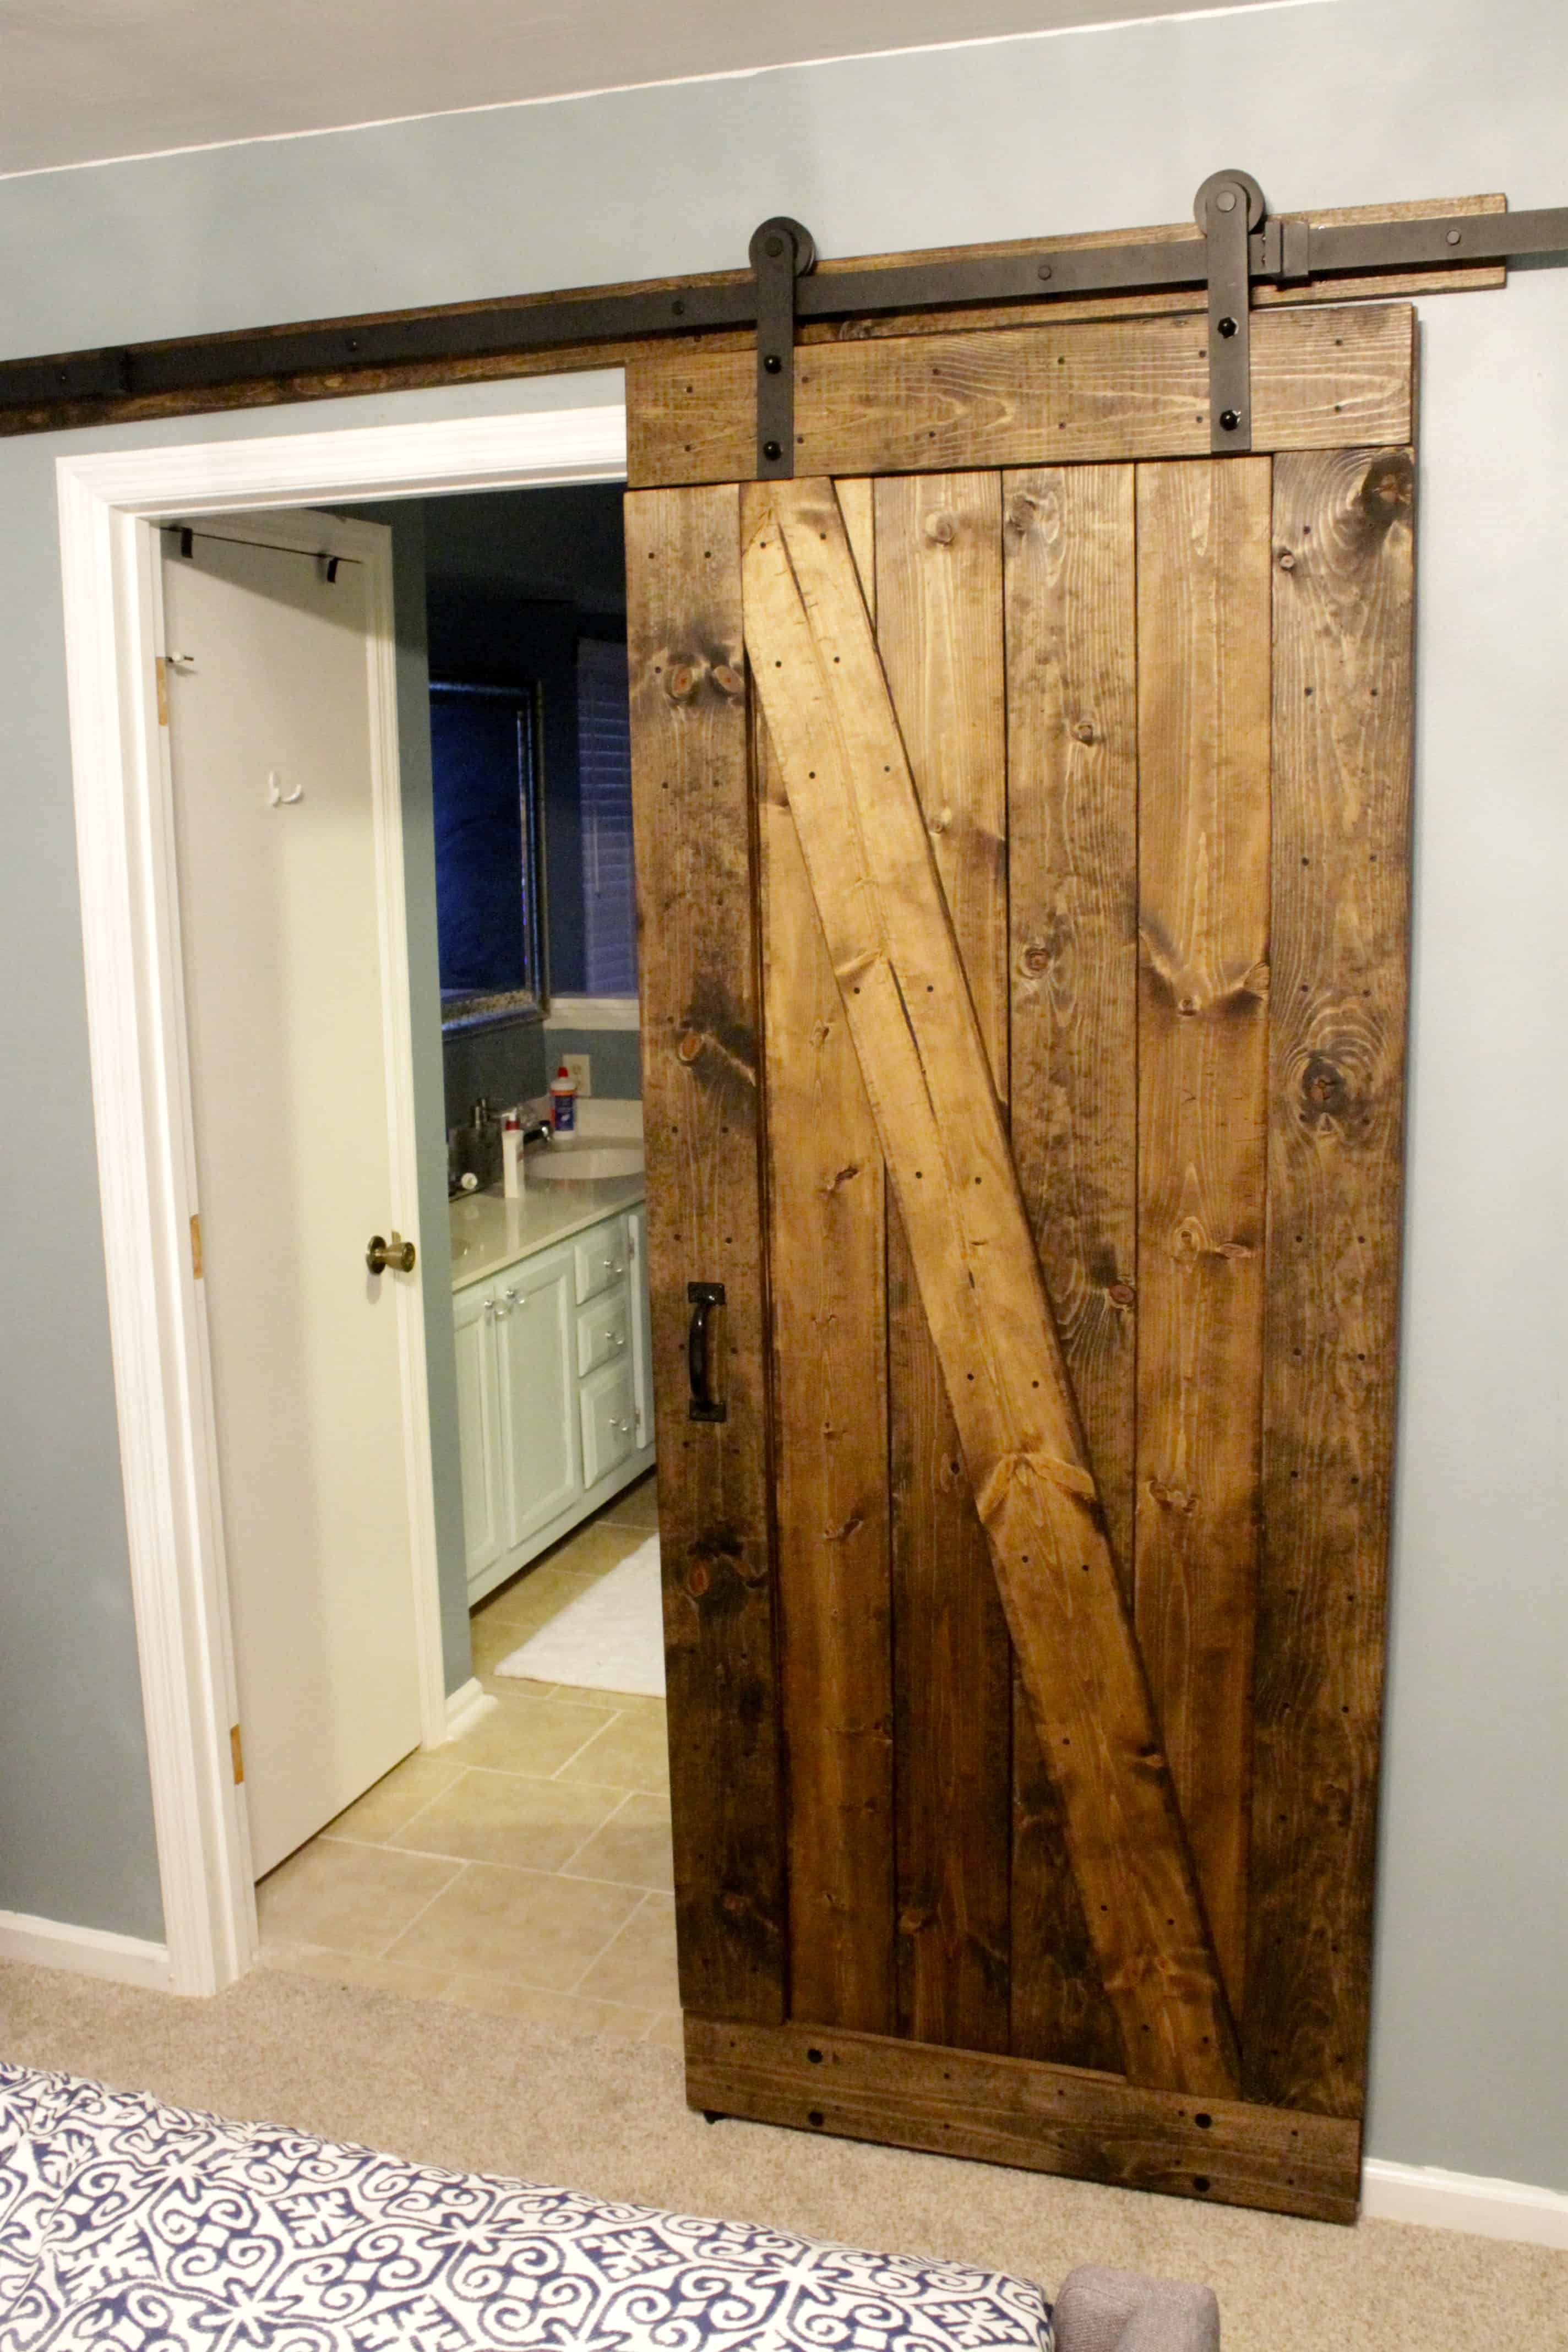 How to Mount a Barn Door - Charleston Crafted